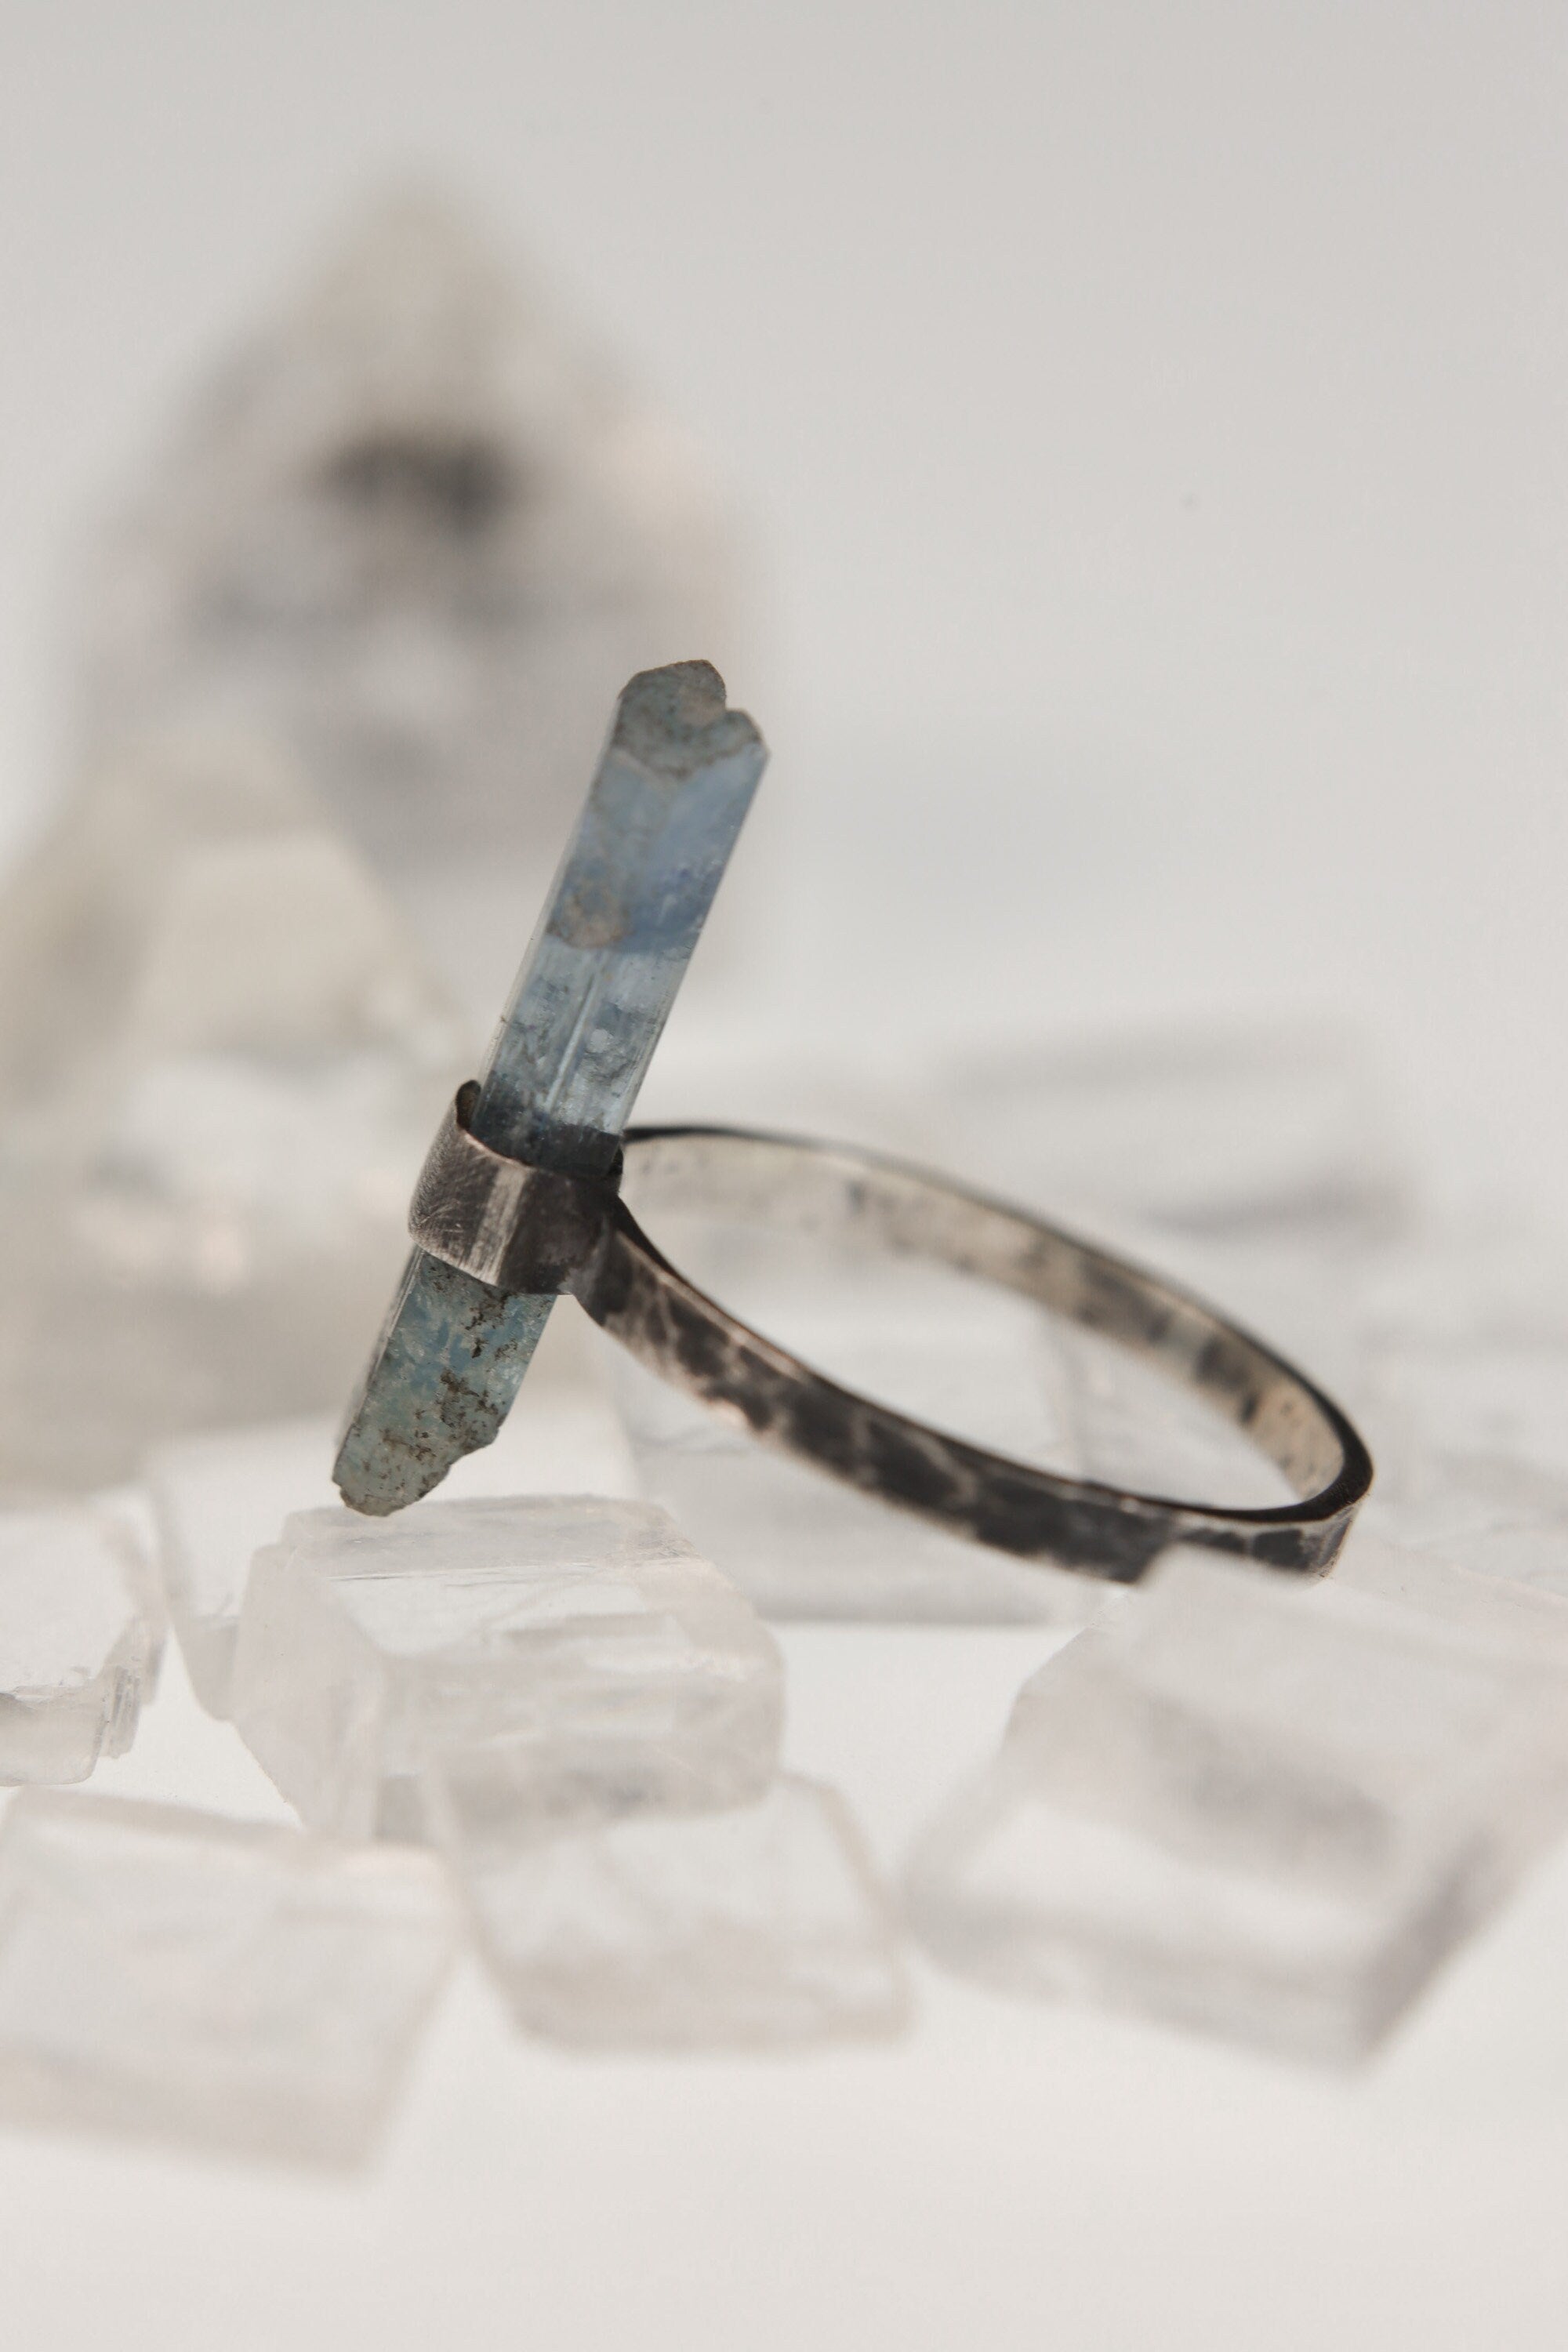 Himalayan Whisper: Textured & Oxidised Sterling Silver Ring with Raw Natural Himalayan Aquamarine - Size 8 1/2 US - NO/01